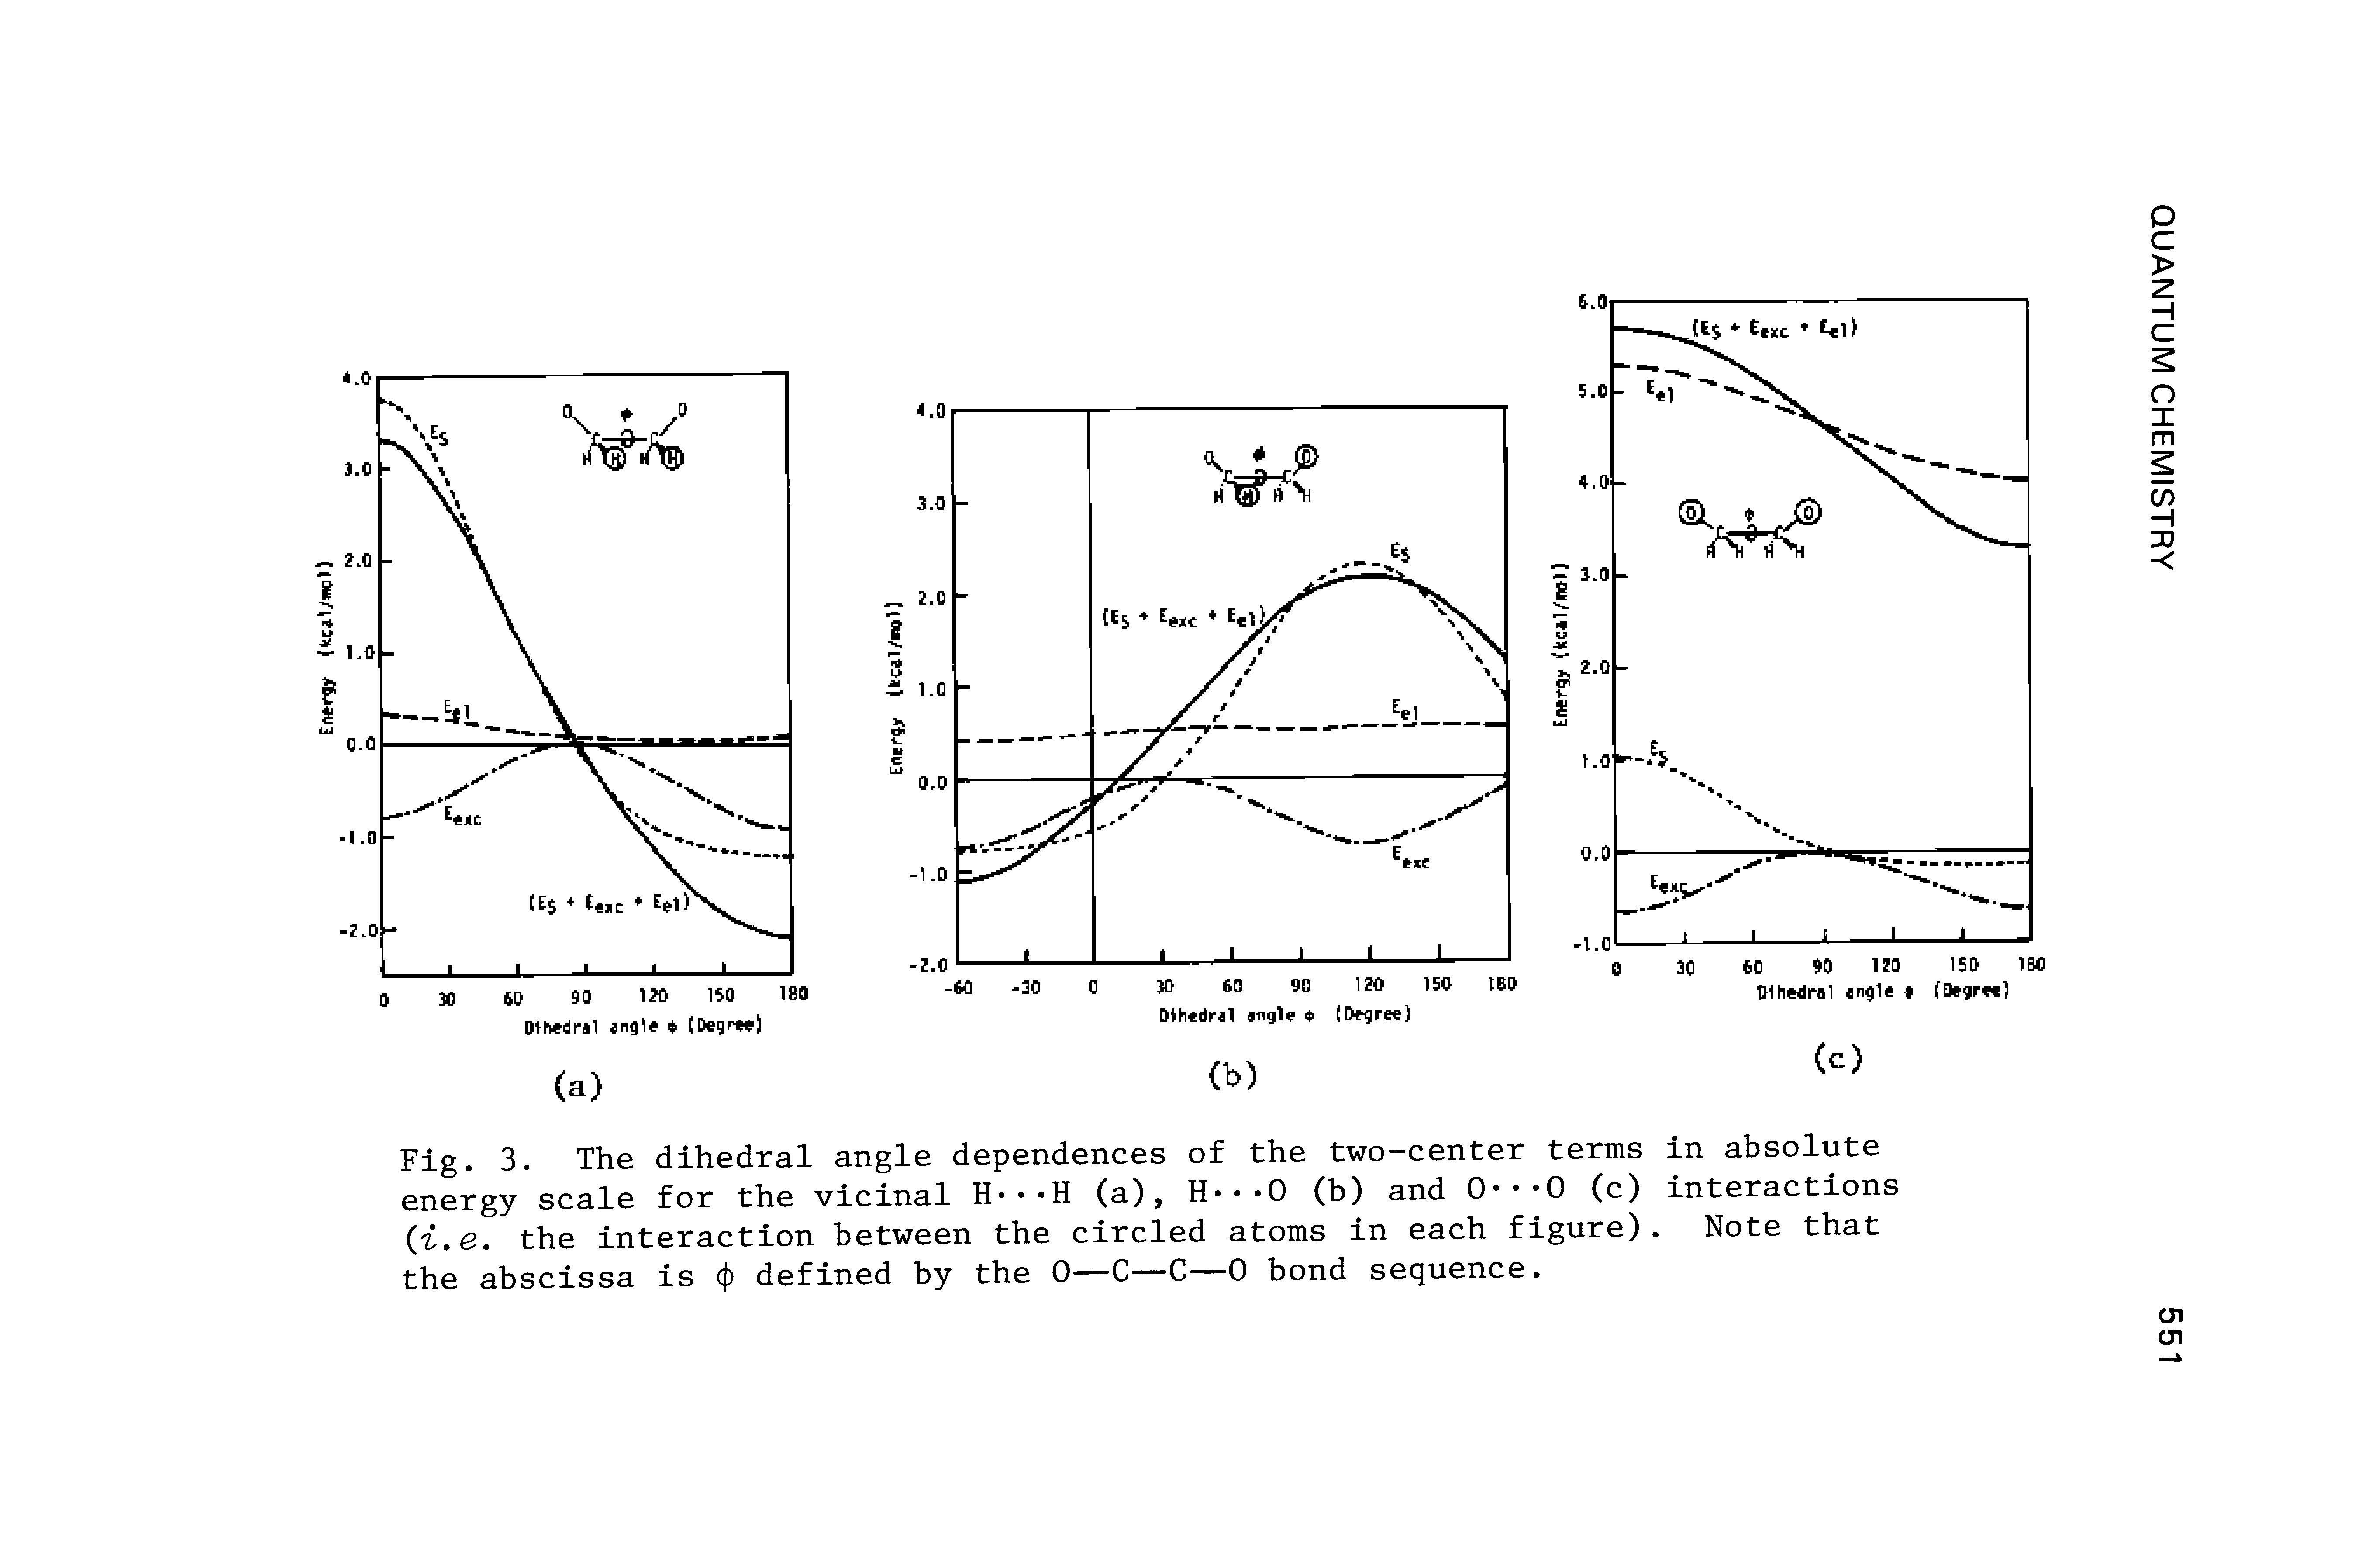 Fig. 3. The dihedral angle dependences of the two-center terms in absolute energy scale for the vicinal H H (a), H 0 (b) and 0 0 (c) interactions. .e. the interaction between the circled atoms in each figure). Note that the abscissa is cj) defined by the 0—C—C—0 bond sequence.